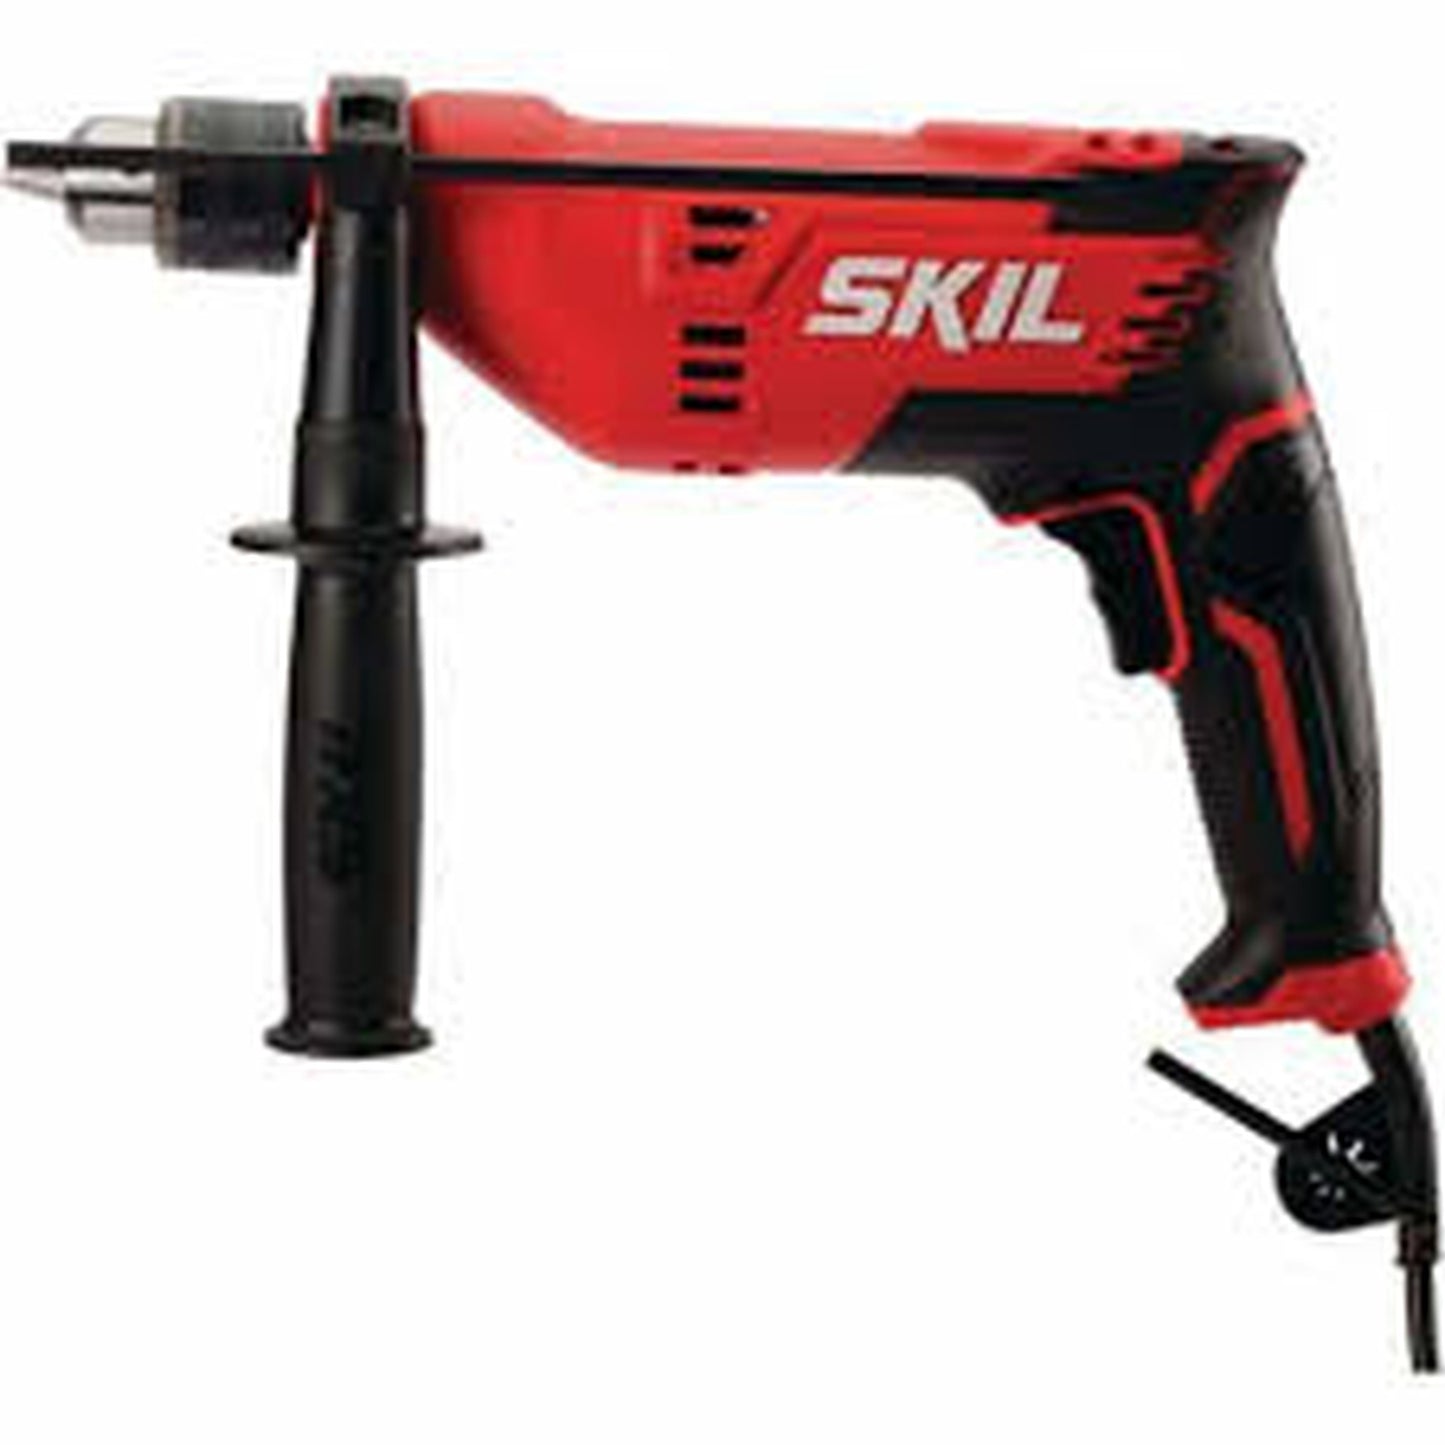 SKIL 7-Amp 1/2-in Keyed Corded Drill